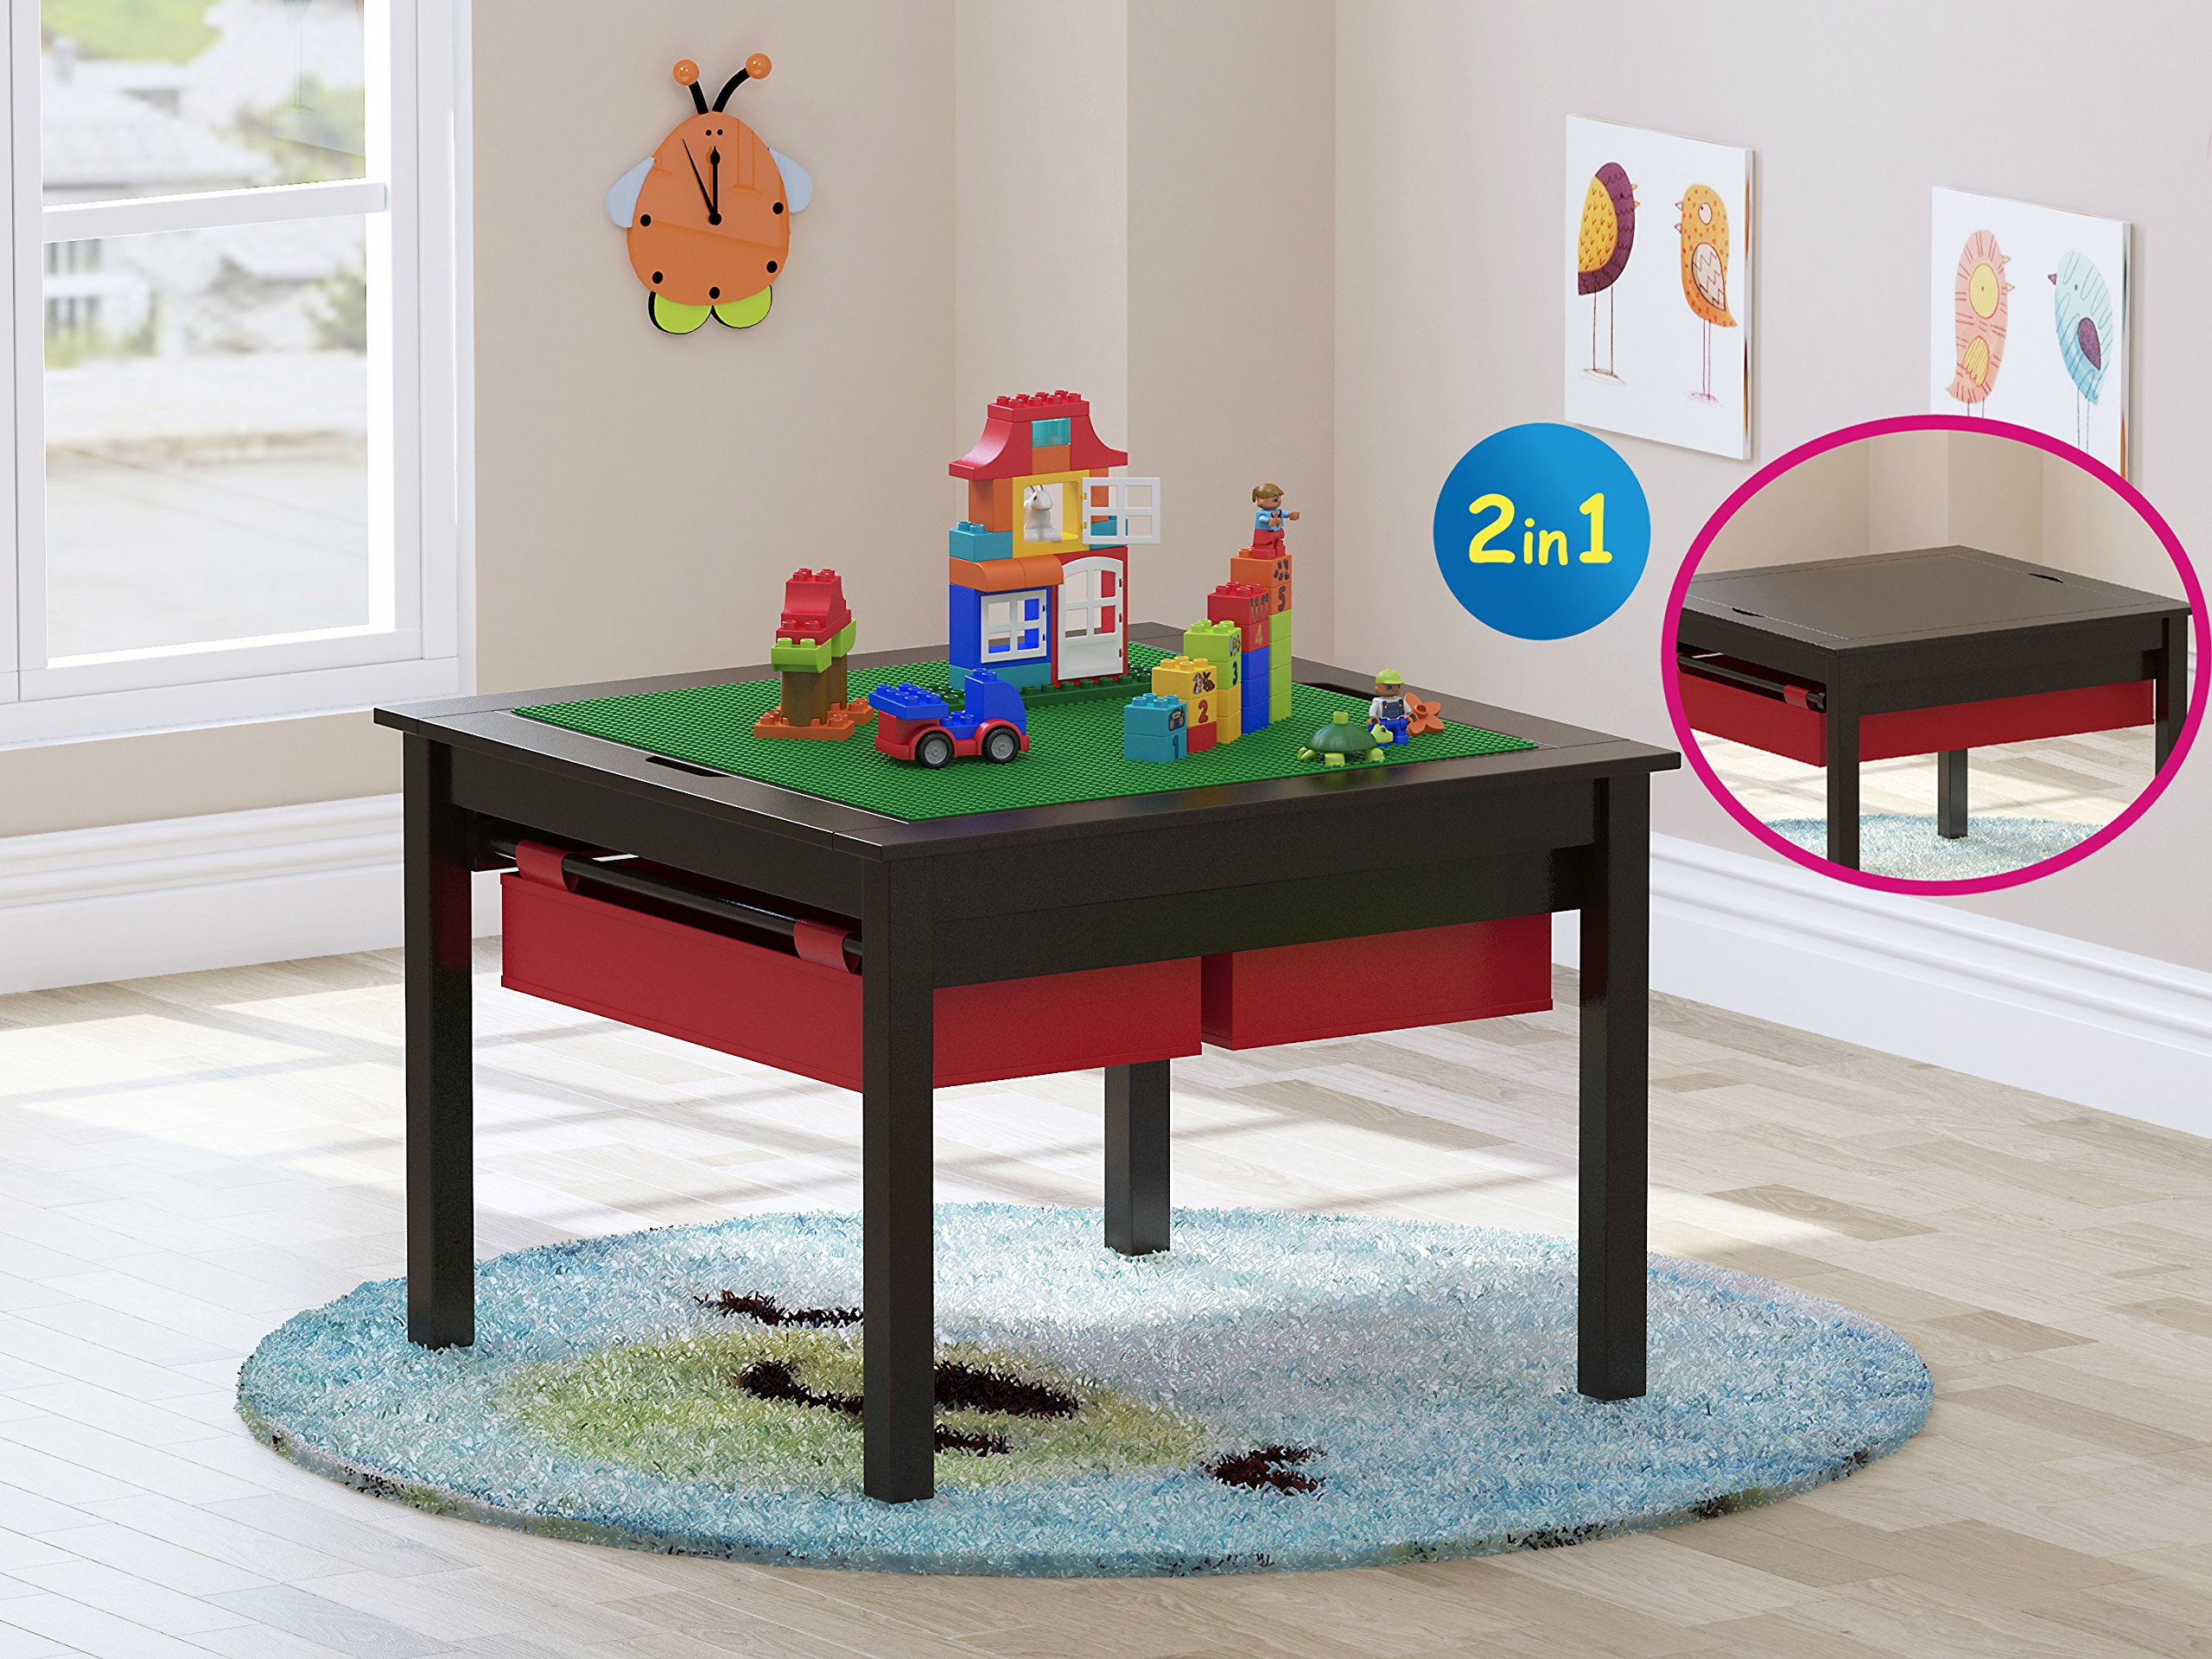 Kids Lego Table
 UTEX 2 In 1 Kids Construction Play Lego Table with Storage